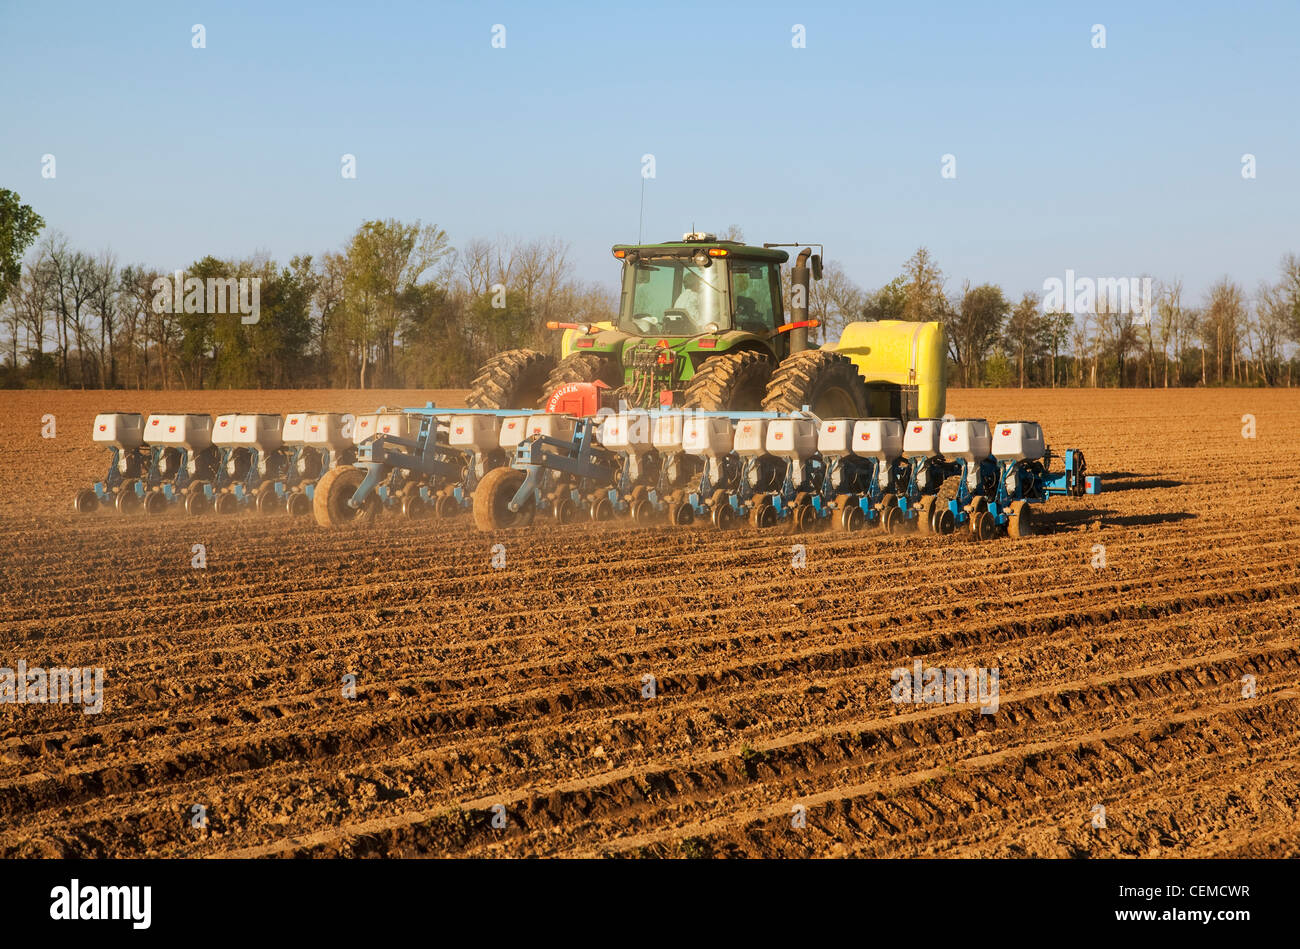 Agriculture - A John Deere tractor and Monosem 24 twin-row planter plants grain corn in a conventionally tilled field / Arkansas Stock Photo